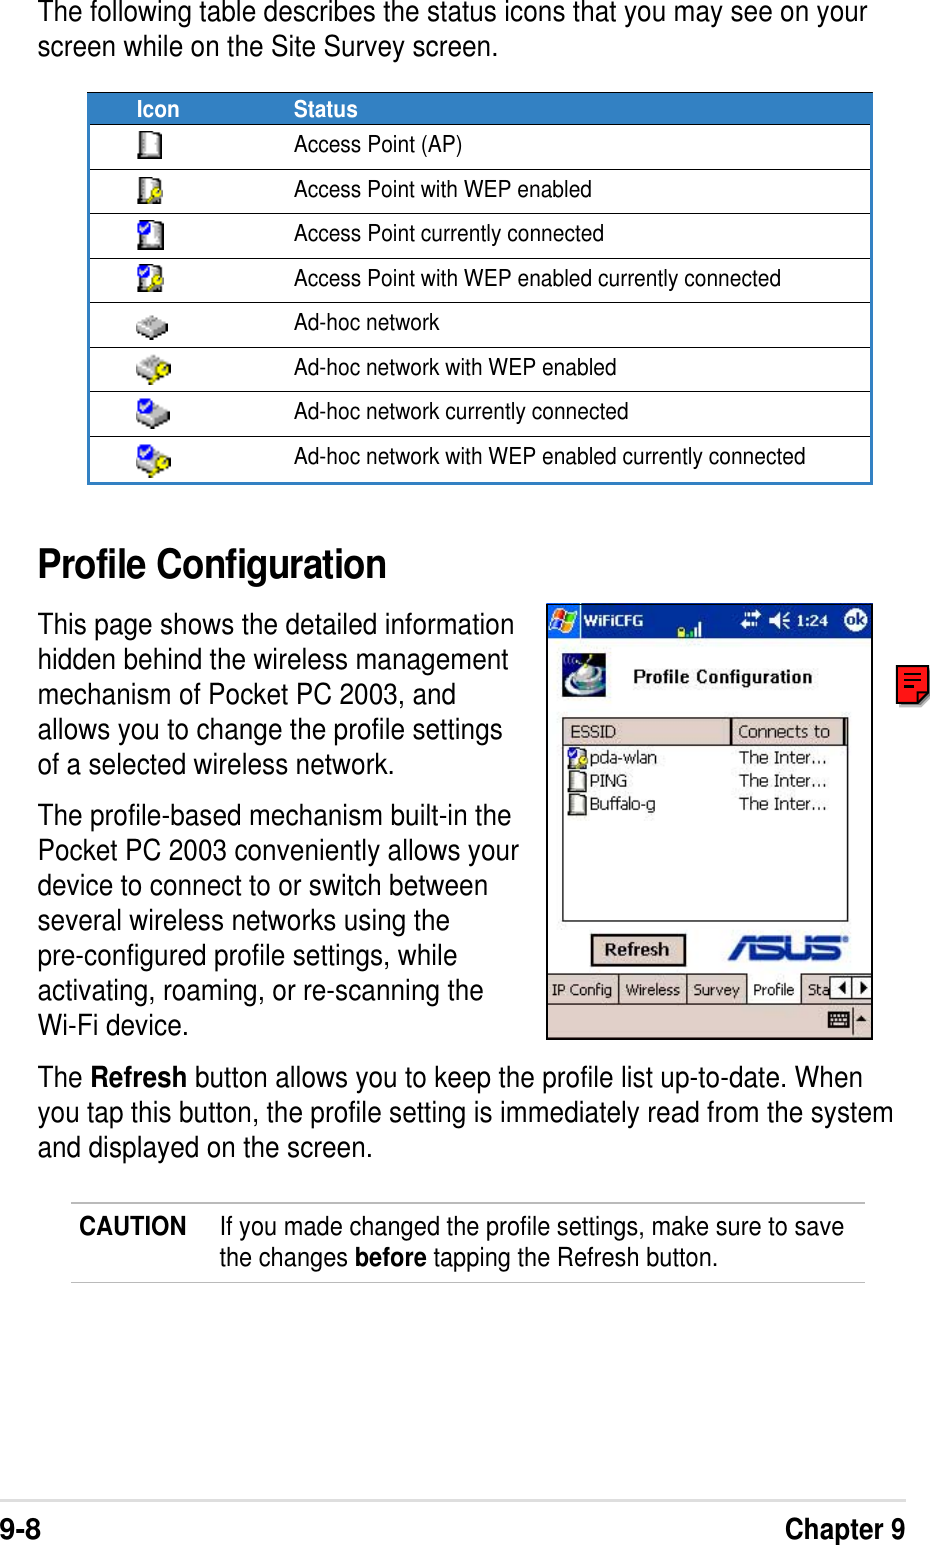 9-8Chapter 9The following table describes the status icons that you may see on yourscreen while on the Site Survey screen.Icon StatusAccess Point (AP)Access Point with WEP enabledAccess Point currently connectedAccess Point with WEP enabled currently connectedAd-hoc networkAd-hoc network with WEP enabledAd-hoc network currently connectedAd-hoc network with WEP enabled currently connectedProfile ConfigurationThis page shows the detailed informationhidden behind the wireless managementmechanism of Pocket PC 2003, andallows you to change the profile settingsof a selected wireless network.The profile-based mechanism built-in thePocket PC 2003 conveniently allows yourdevice to connect to or switch betweenseveral wireless networks using thepre-configured profile settings, whileactivating, roaming, or re-scanning theWi-Fi device.The Refresh button allows you to keep the profile list up-to-date. Whenyou tap this button, the profile setting is immediately read from the systemand displayed on the screen.CAUTION If you made changed the profile settings, make sure to savethe changes before tapping the Refresh button.